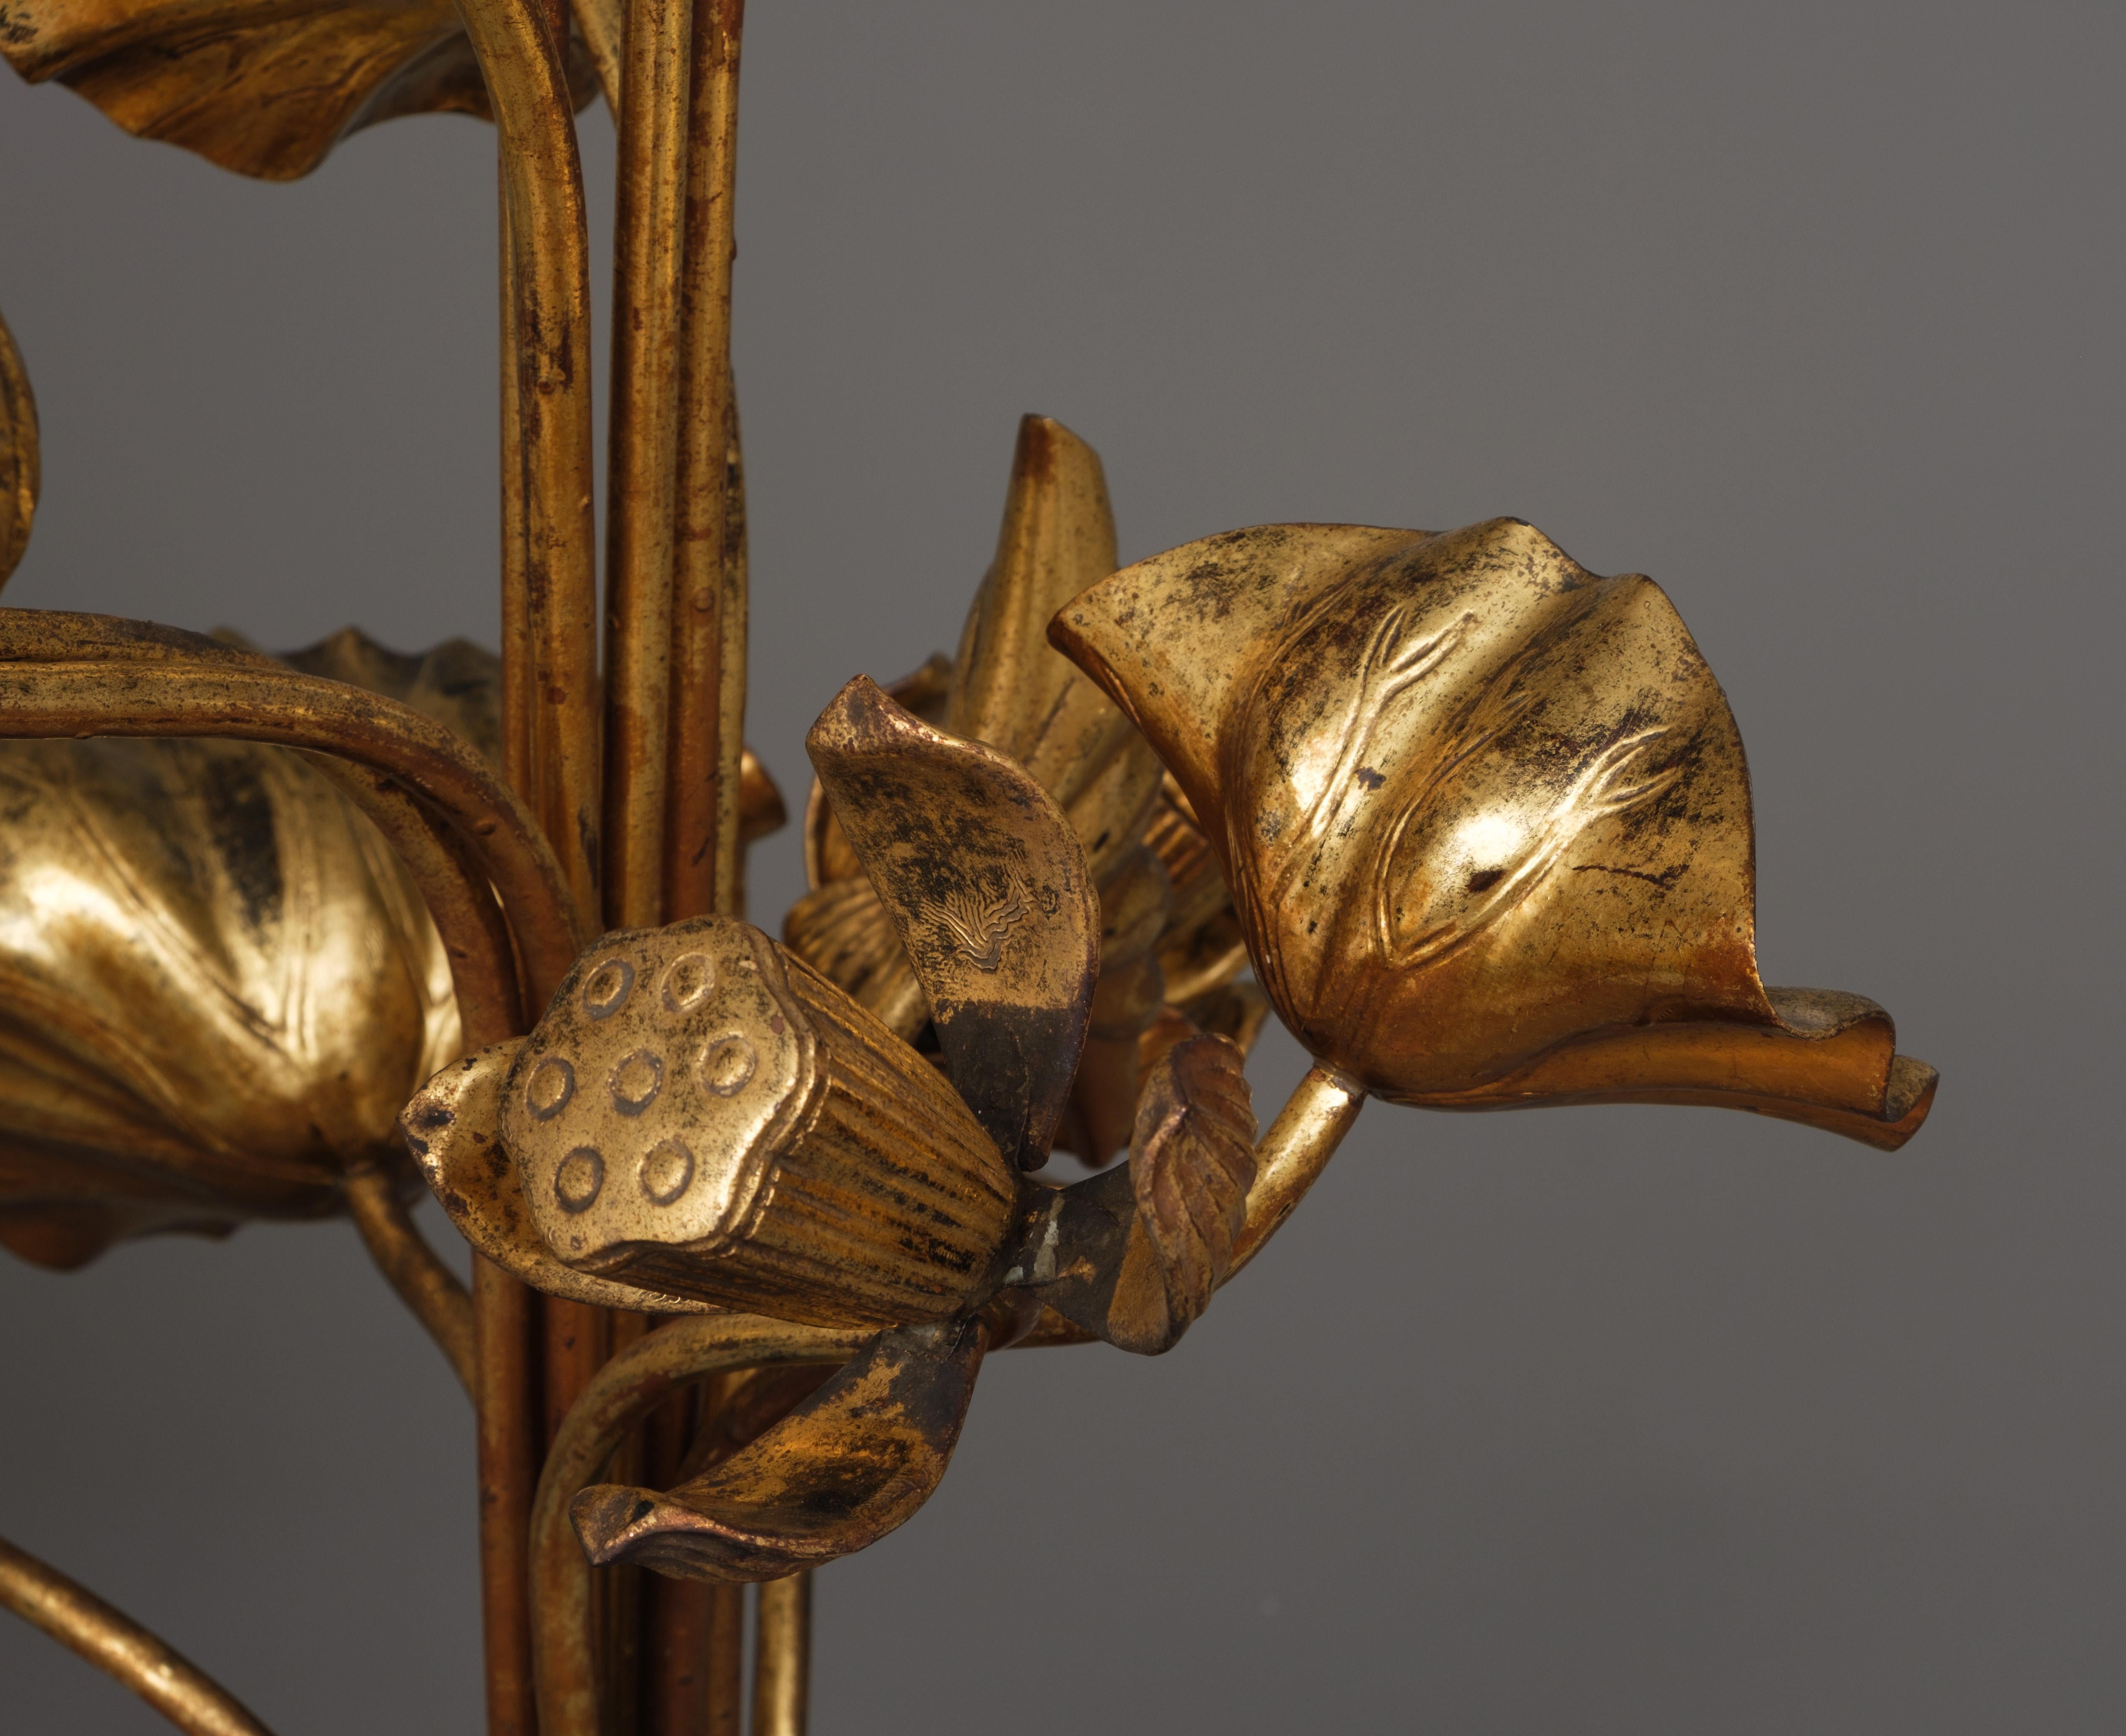 Large pair of Japanese ‘Jyôka’ 常花, sets of gilded lotus flowers and -leaves. 4